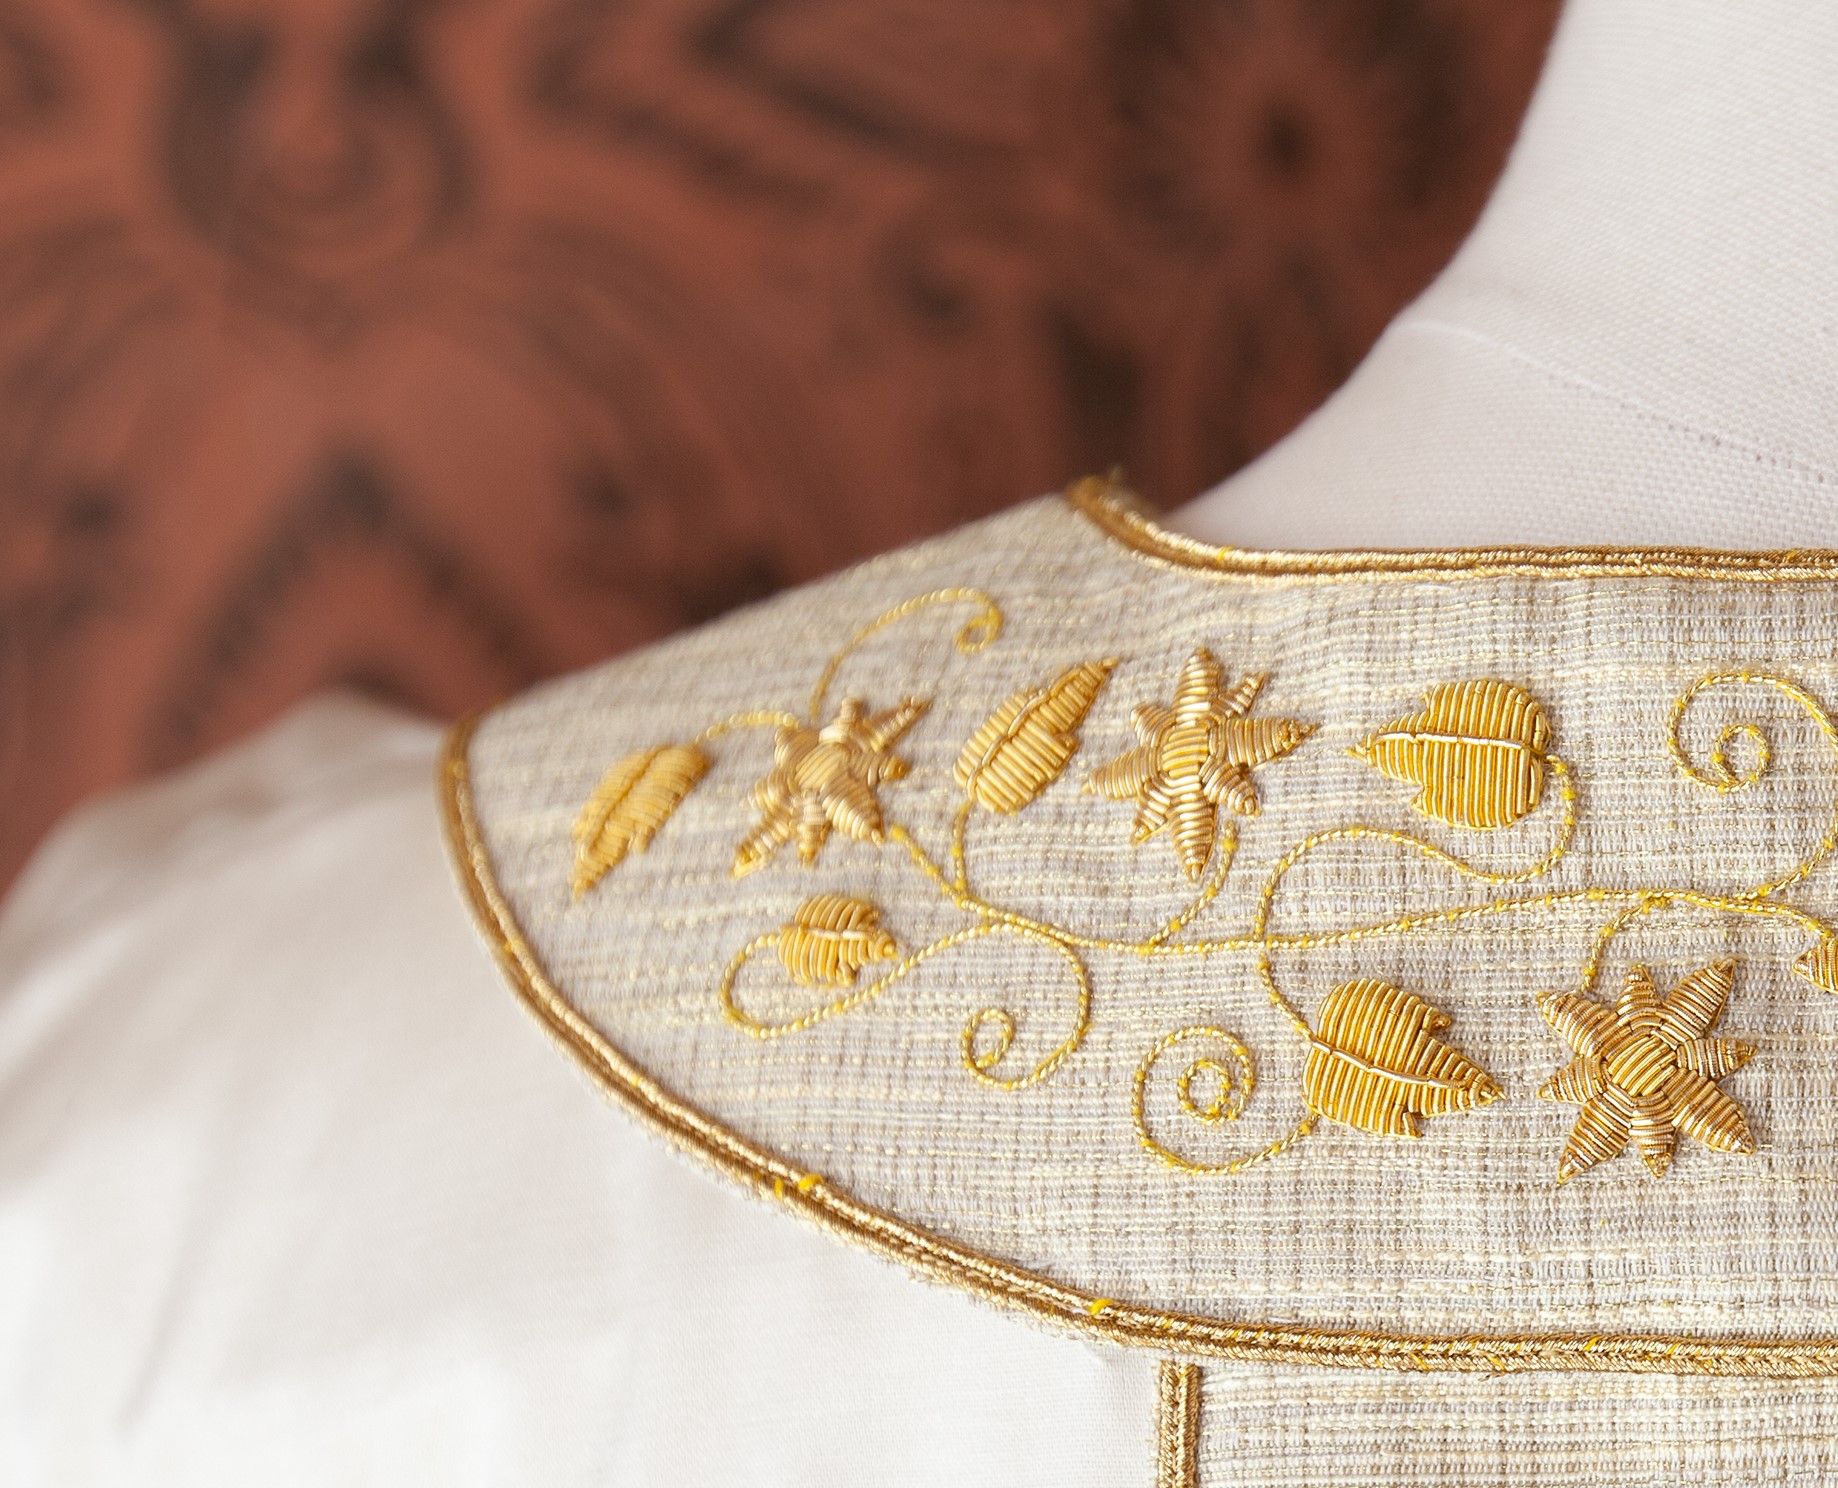 Embroidery on collar of chasuble